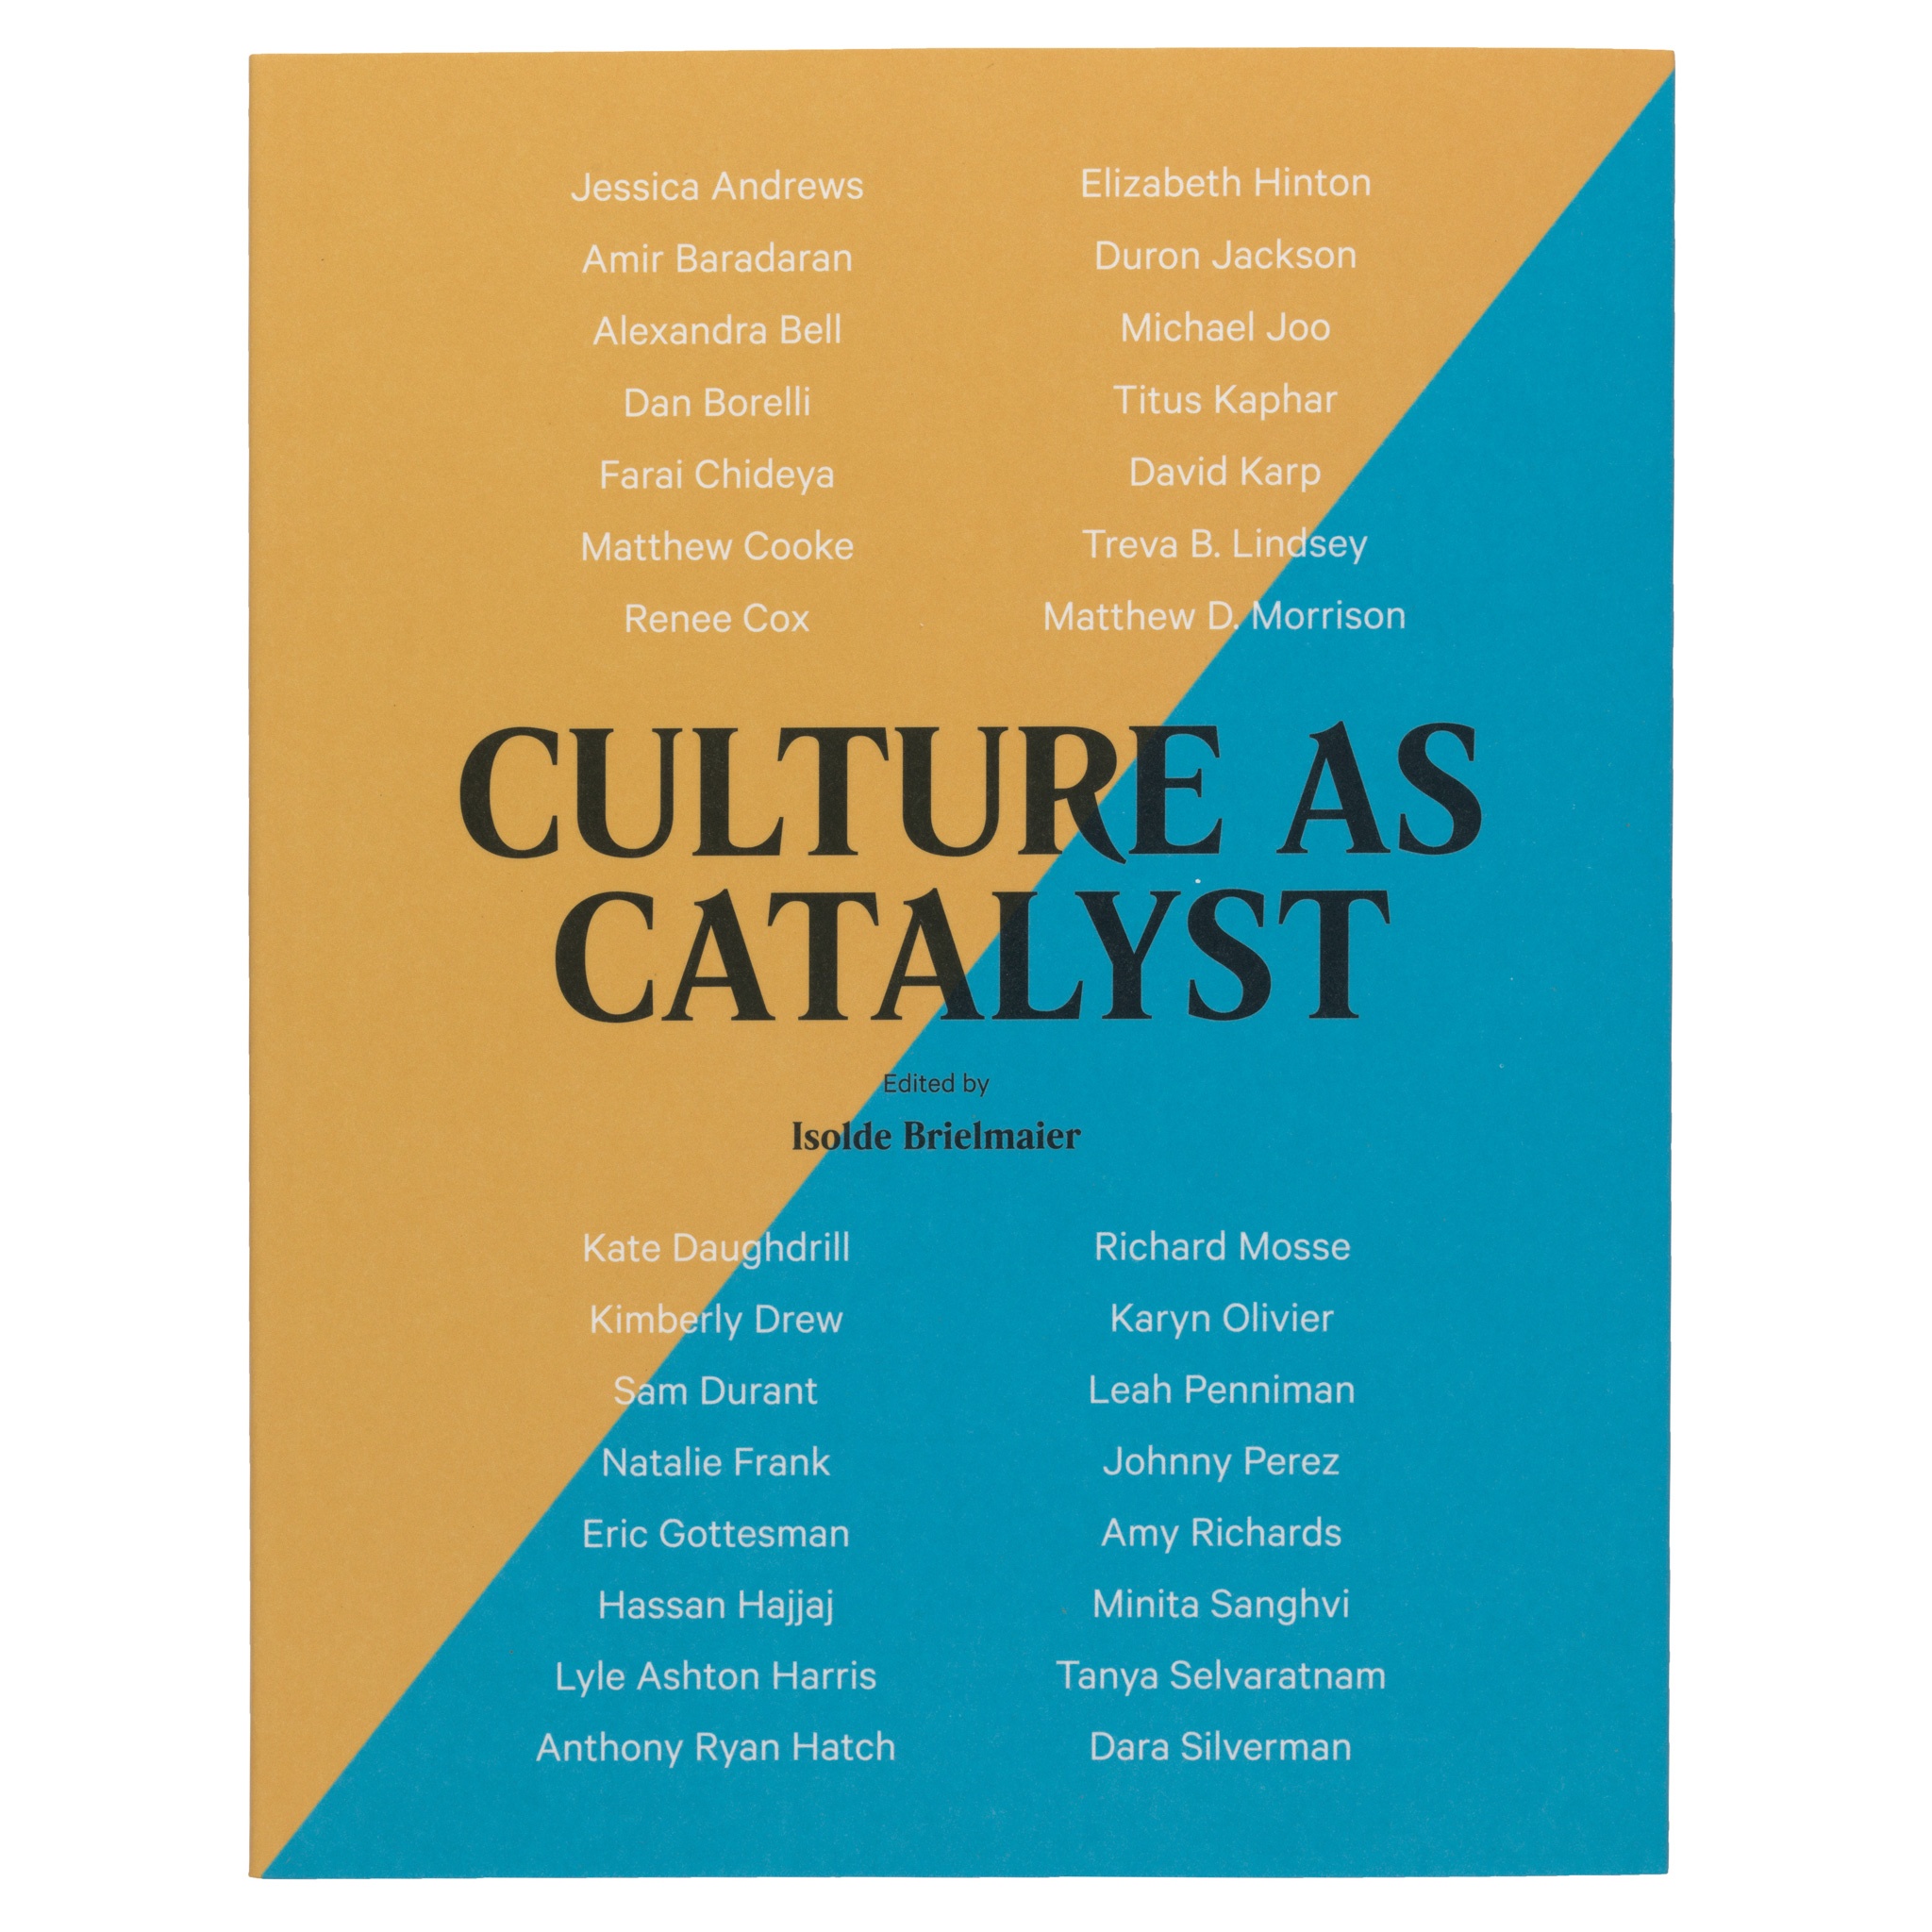 Culture-As-Catalyst_cover_detail.jpg